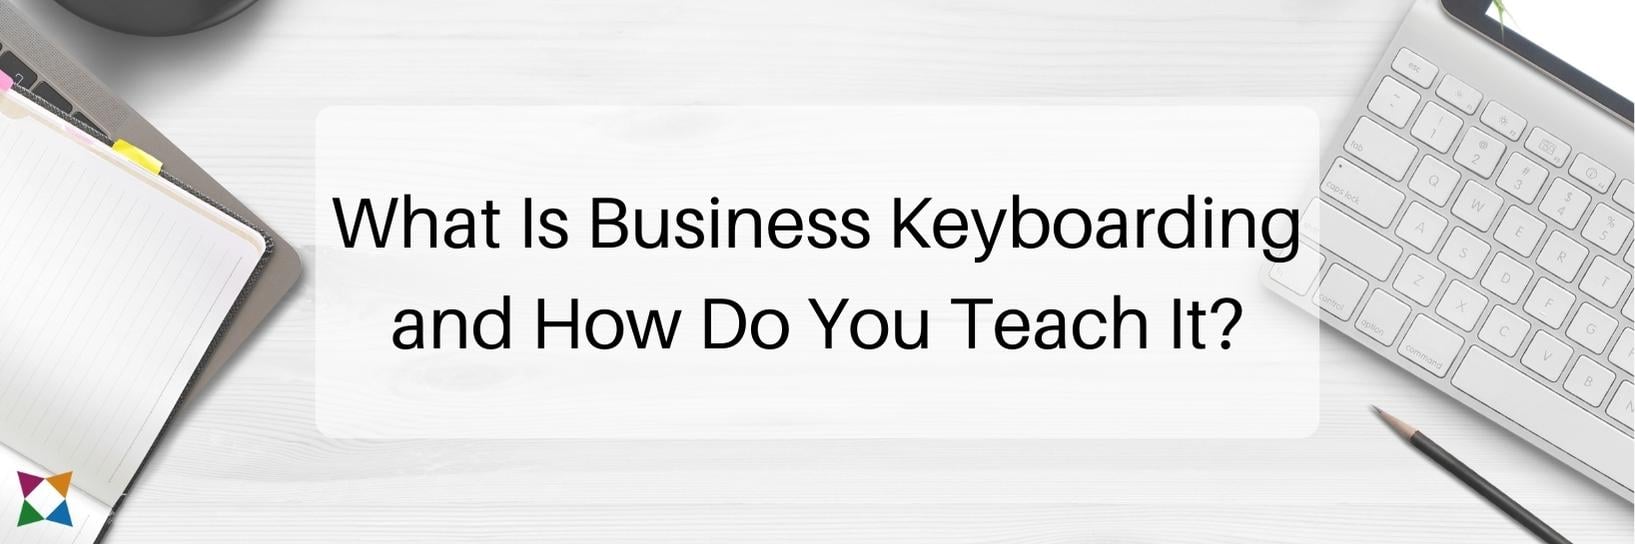 What Is Business Keyboarding and How Do You Teach It?